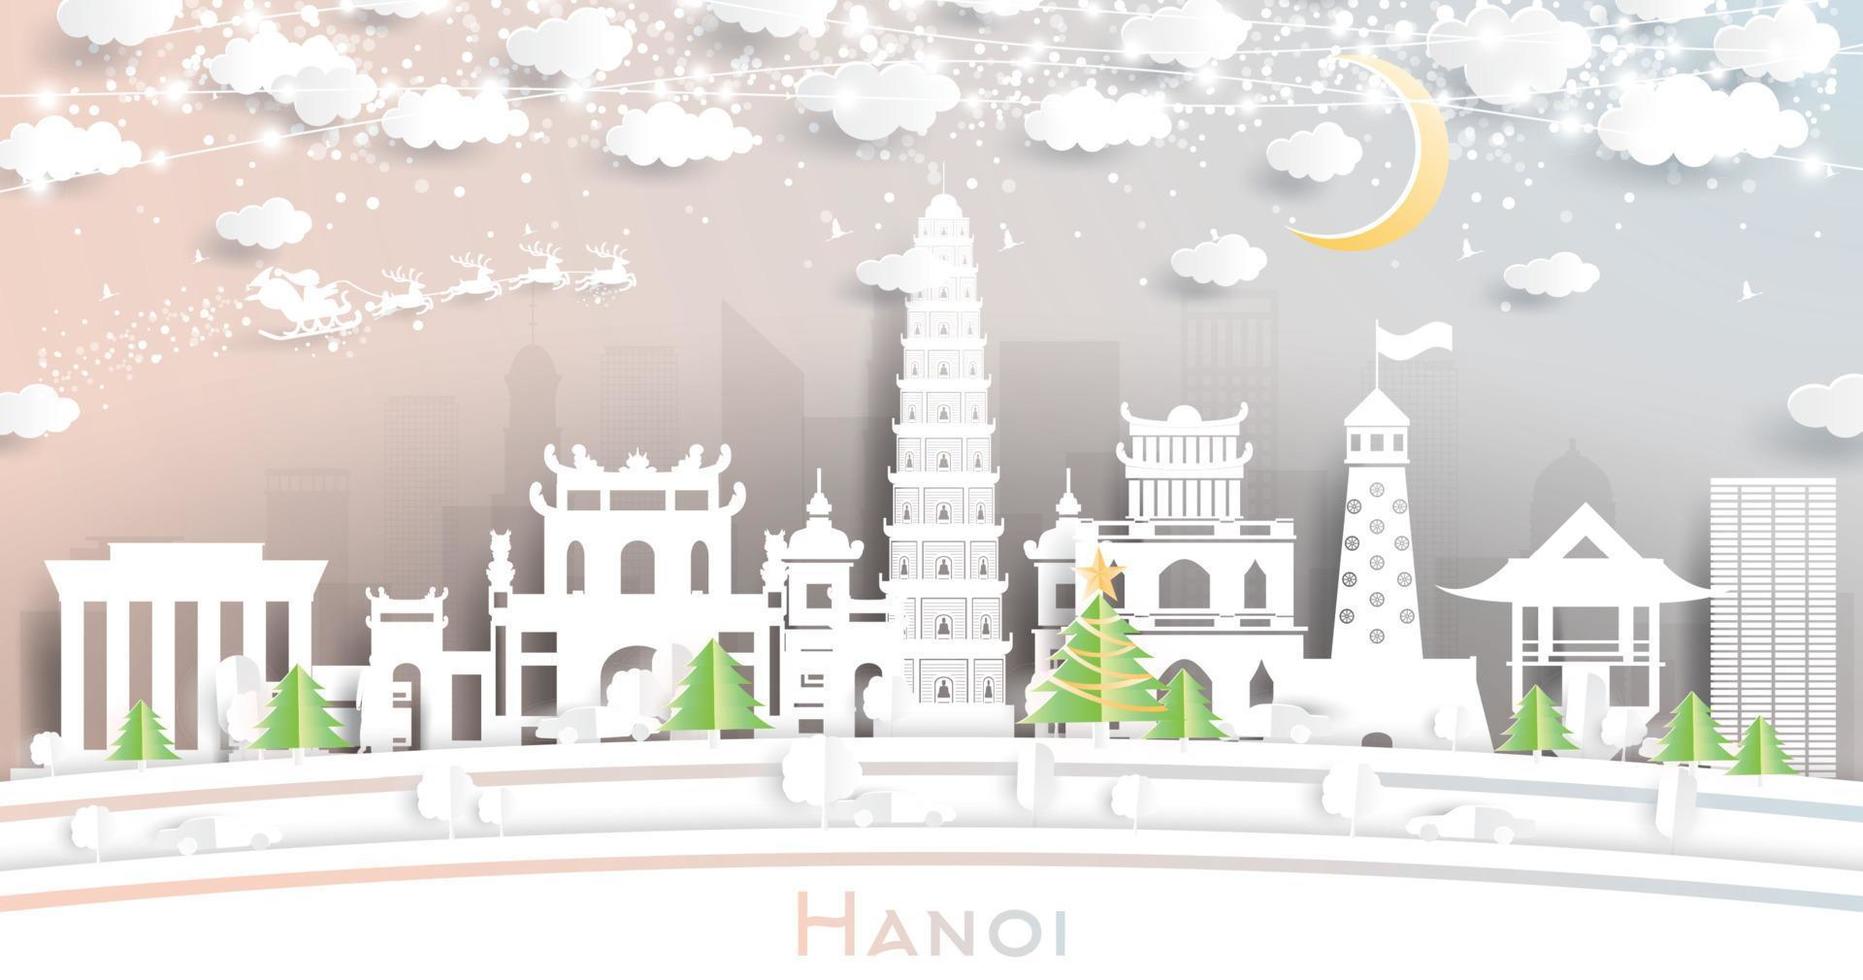 Hanoi Vietnam City Skyline in Paper Cut Style with Snowflakes, Moon and Neon Garland. vector